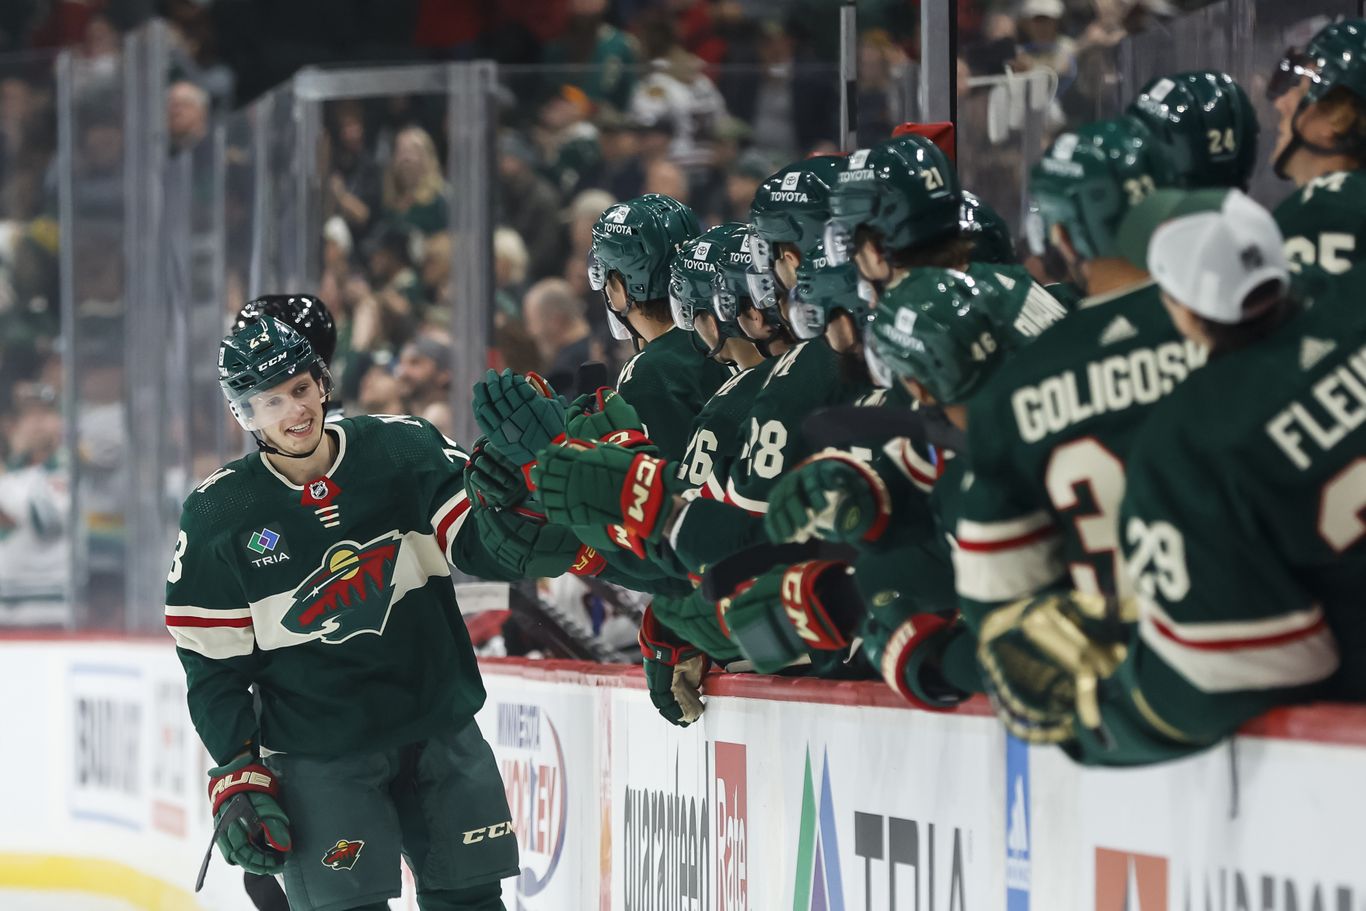 Where Does Calen Addison Fit On Next Year's Team? - Minnesota Wild